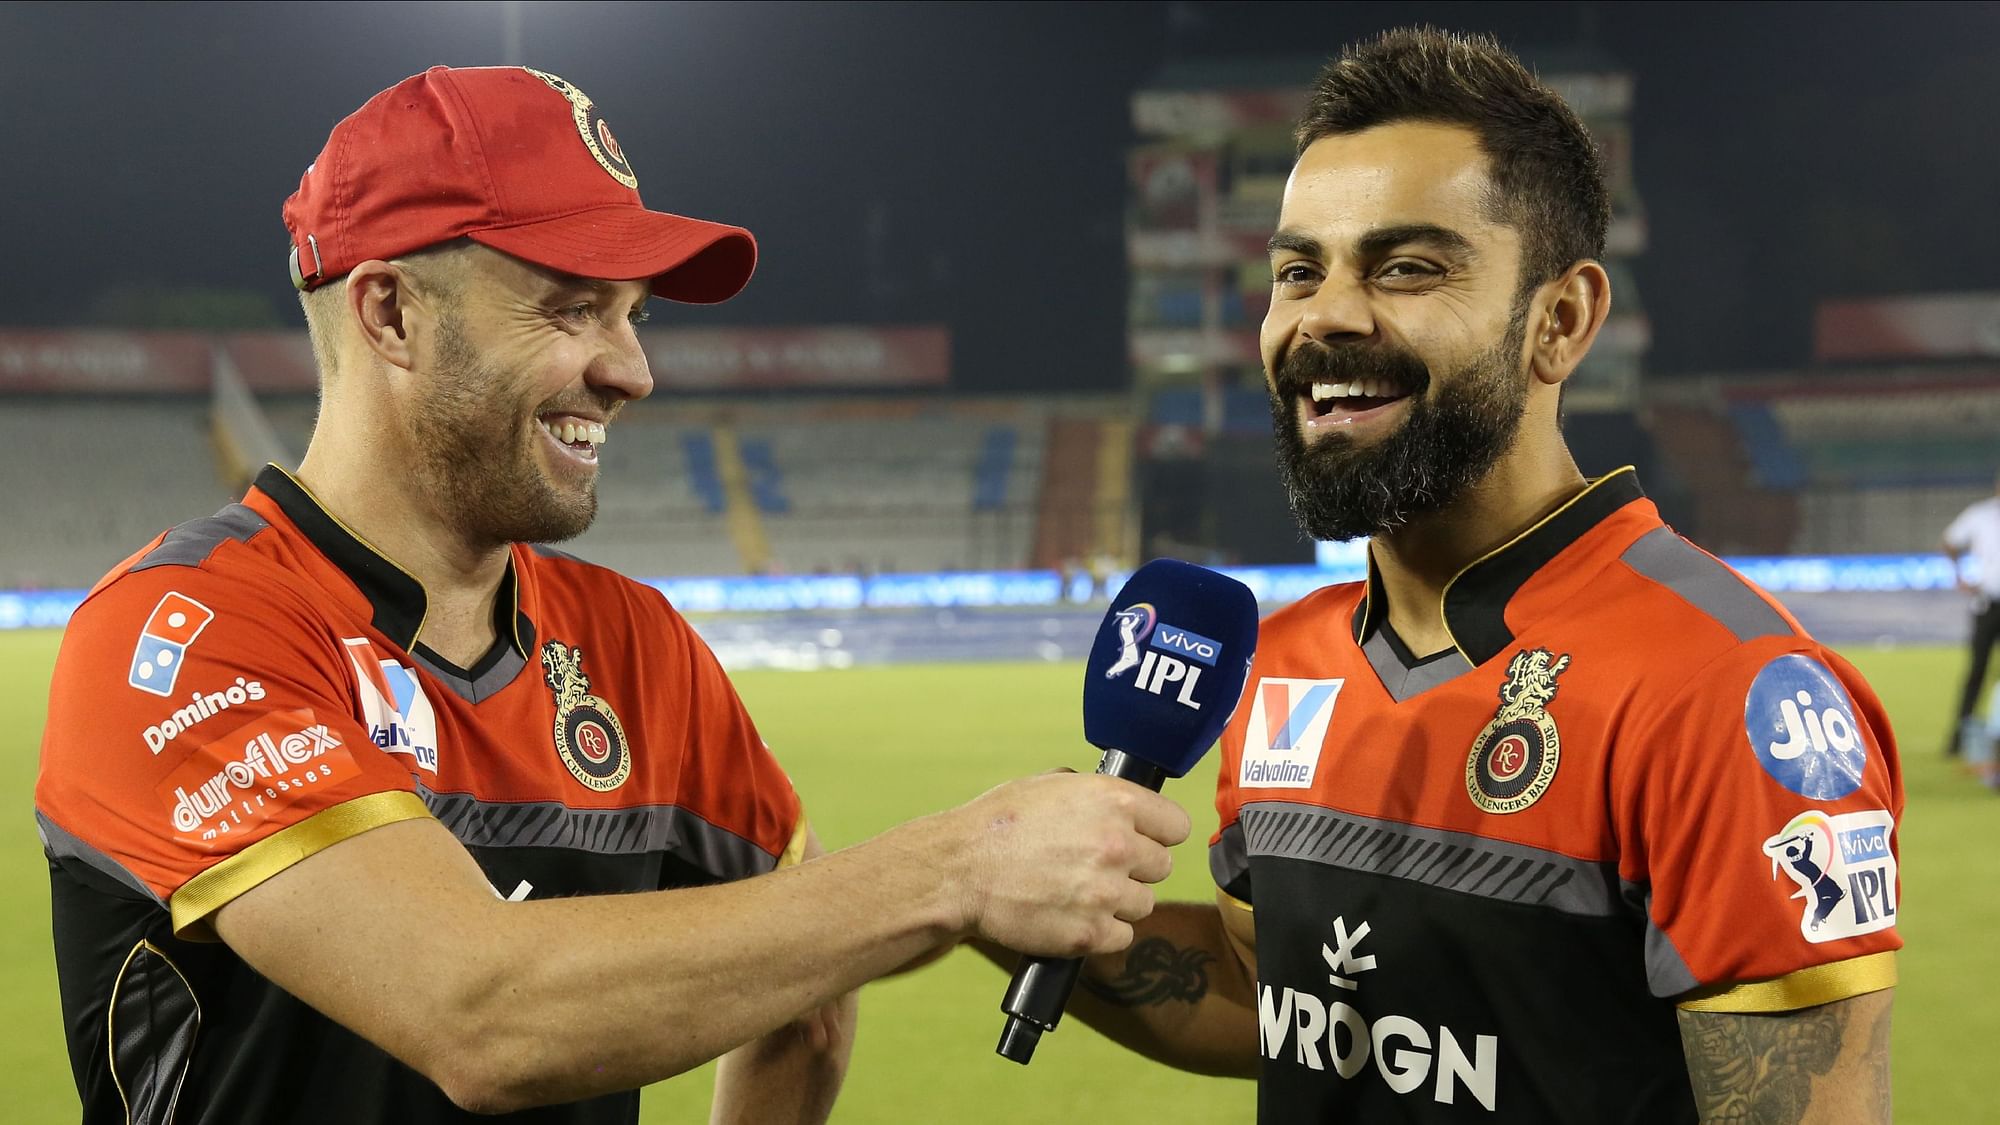 Kohli and De Villiers was all smiles after RCB’s win over KXIP.&nbsp;